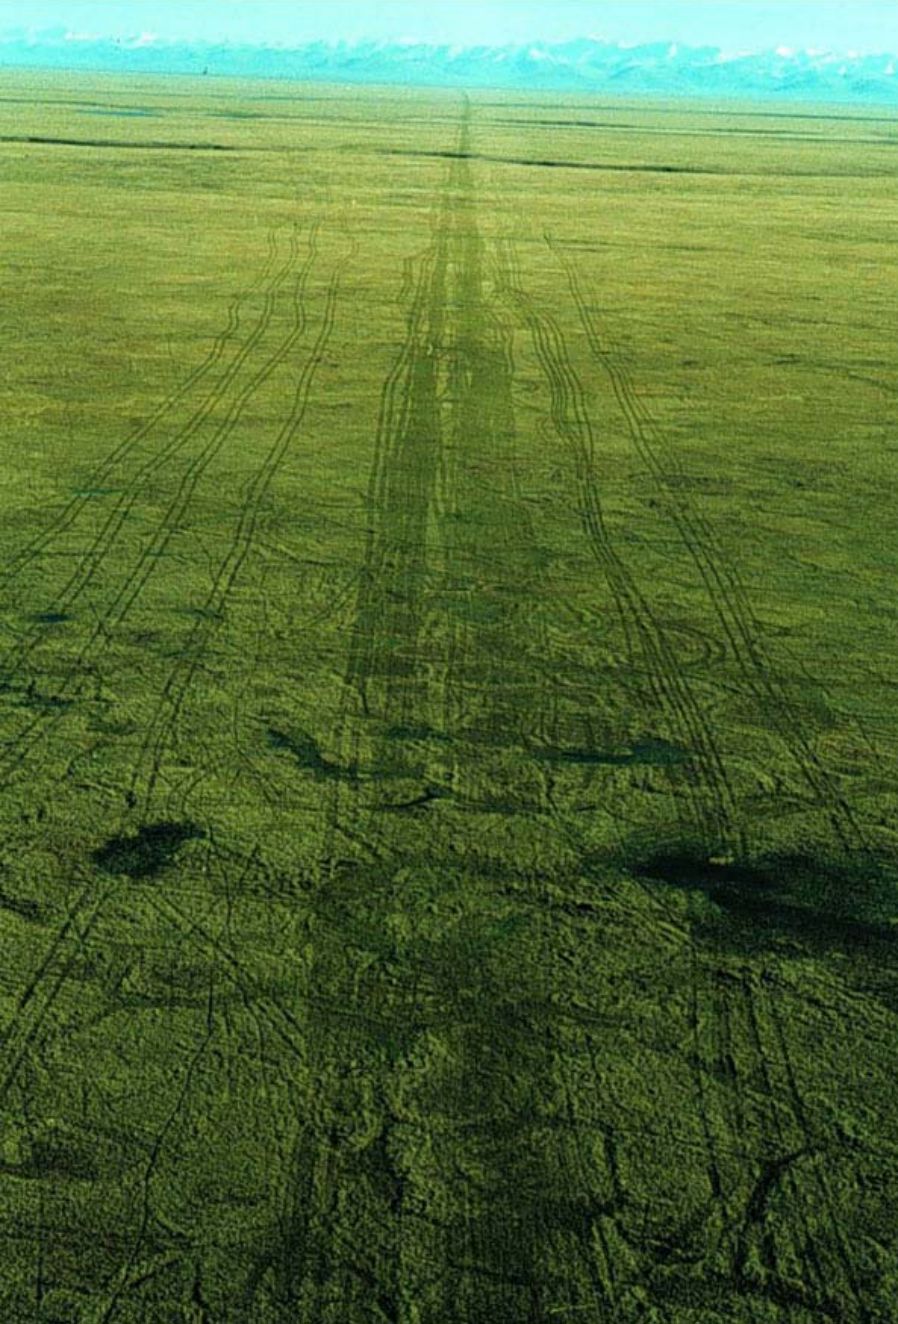 An aerial photograph of seismic lines made in ANWR in the winter of 1985 and photographed in the summer of 1985.